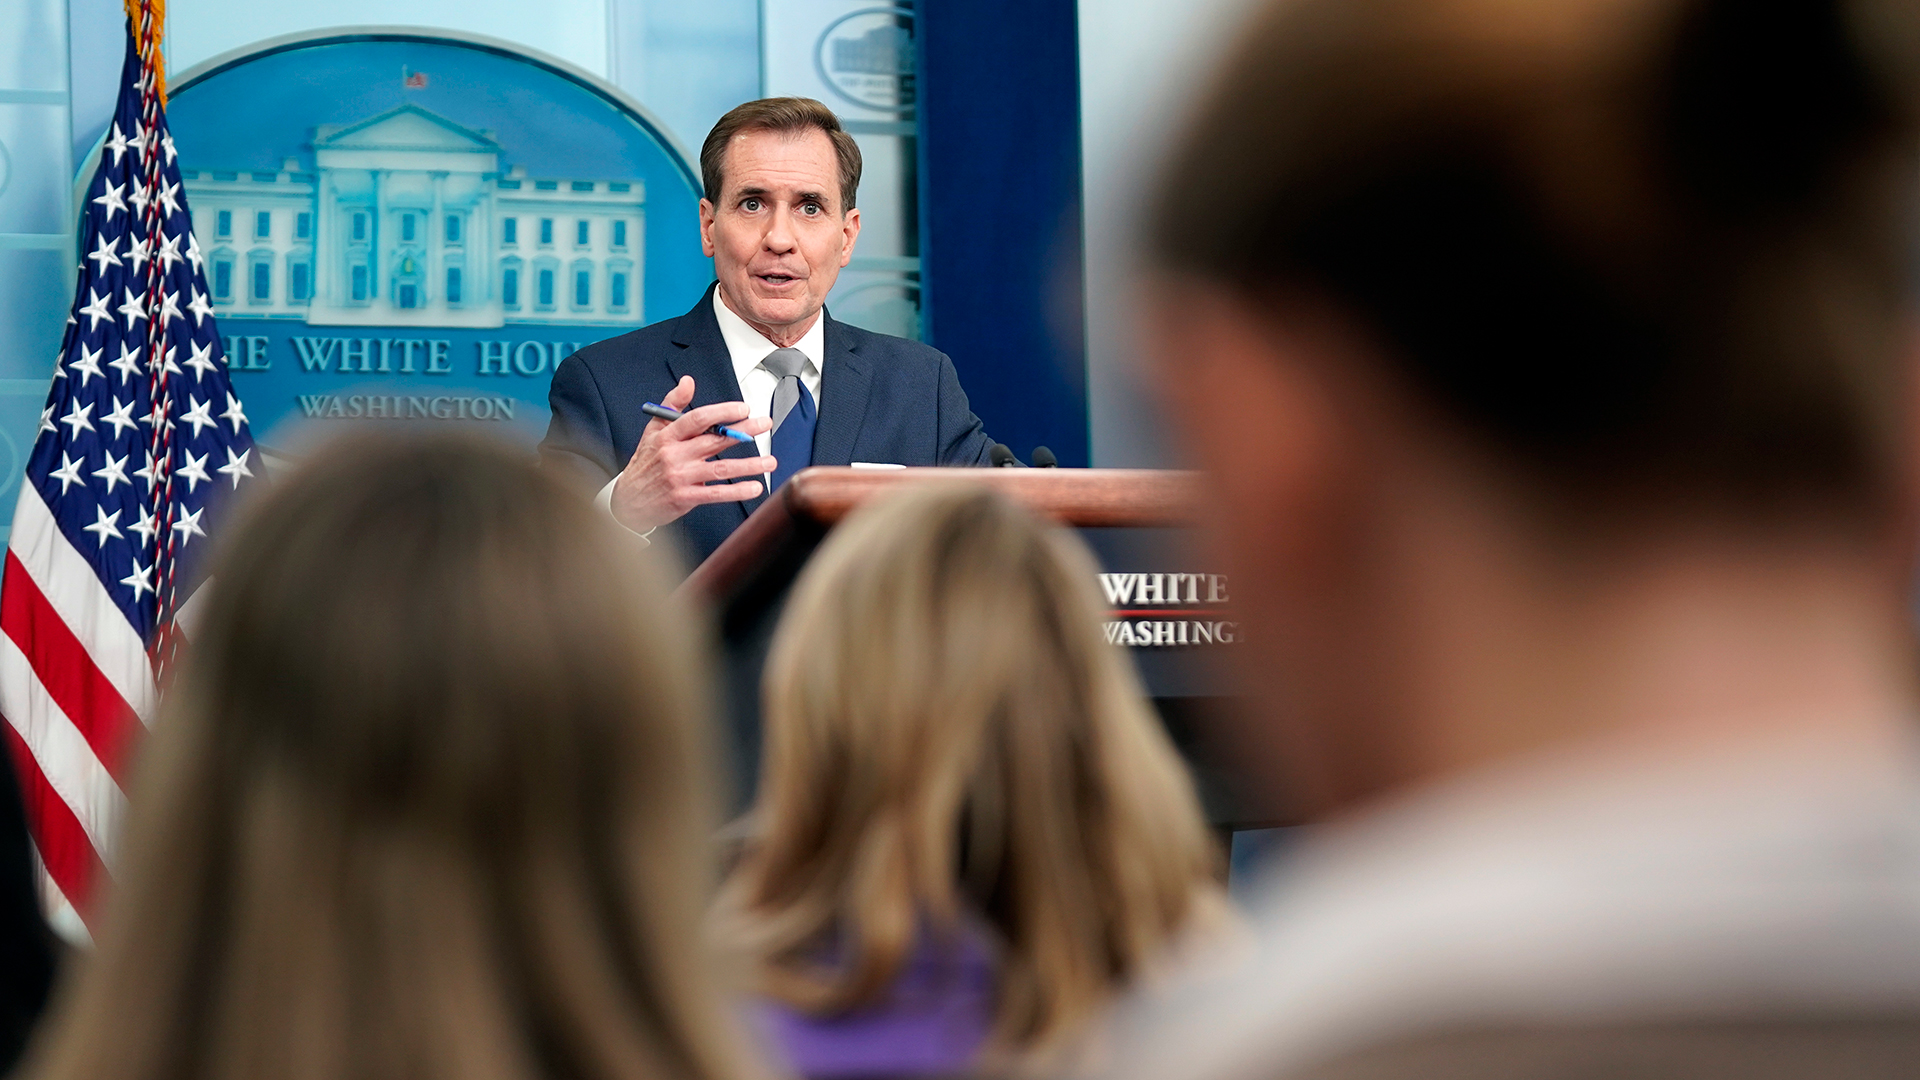 National Security Council spokesman John Kirby speaks during a press briefing at the White House on Wednesday, March 29, in Washington, DC.